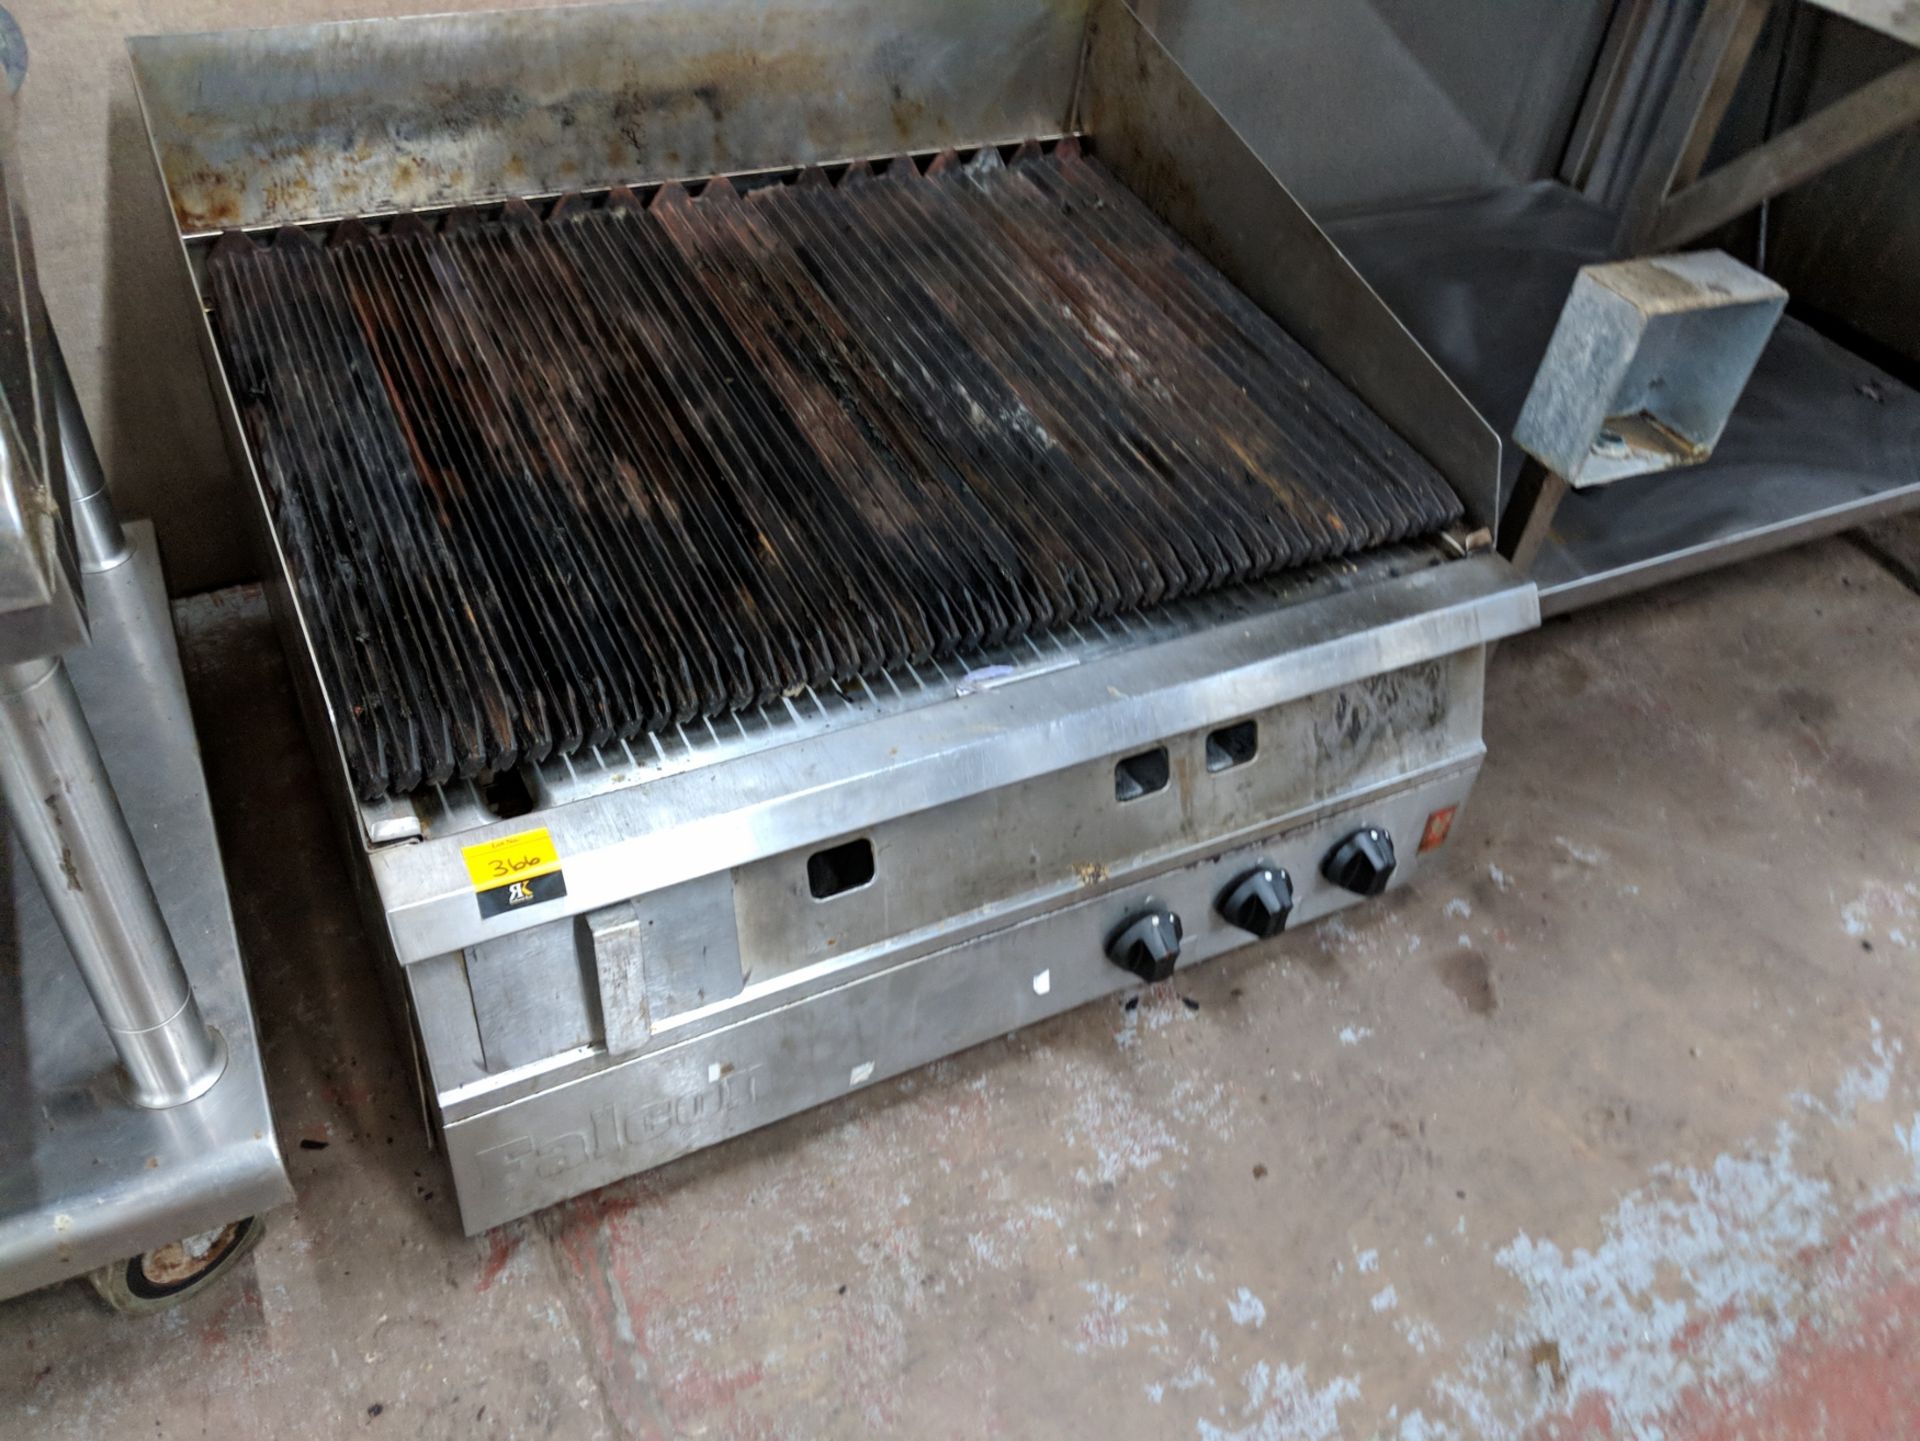 Falcon stainless steel large heavy-duty bench top 3-zone griddle unit circa 900mm x 800mm IMPORTANT: